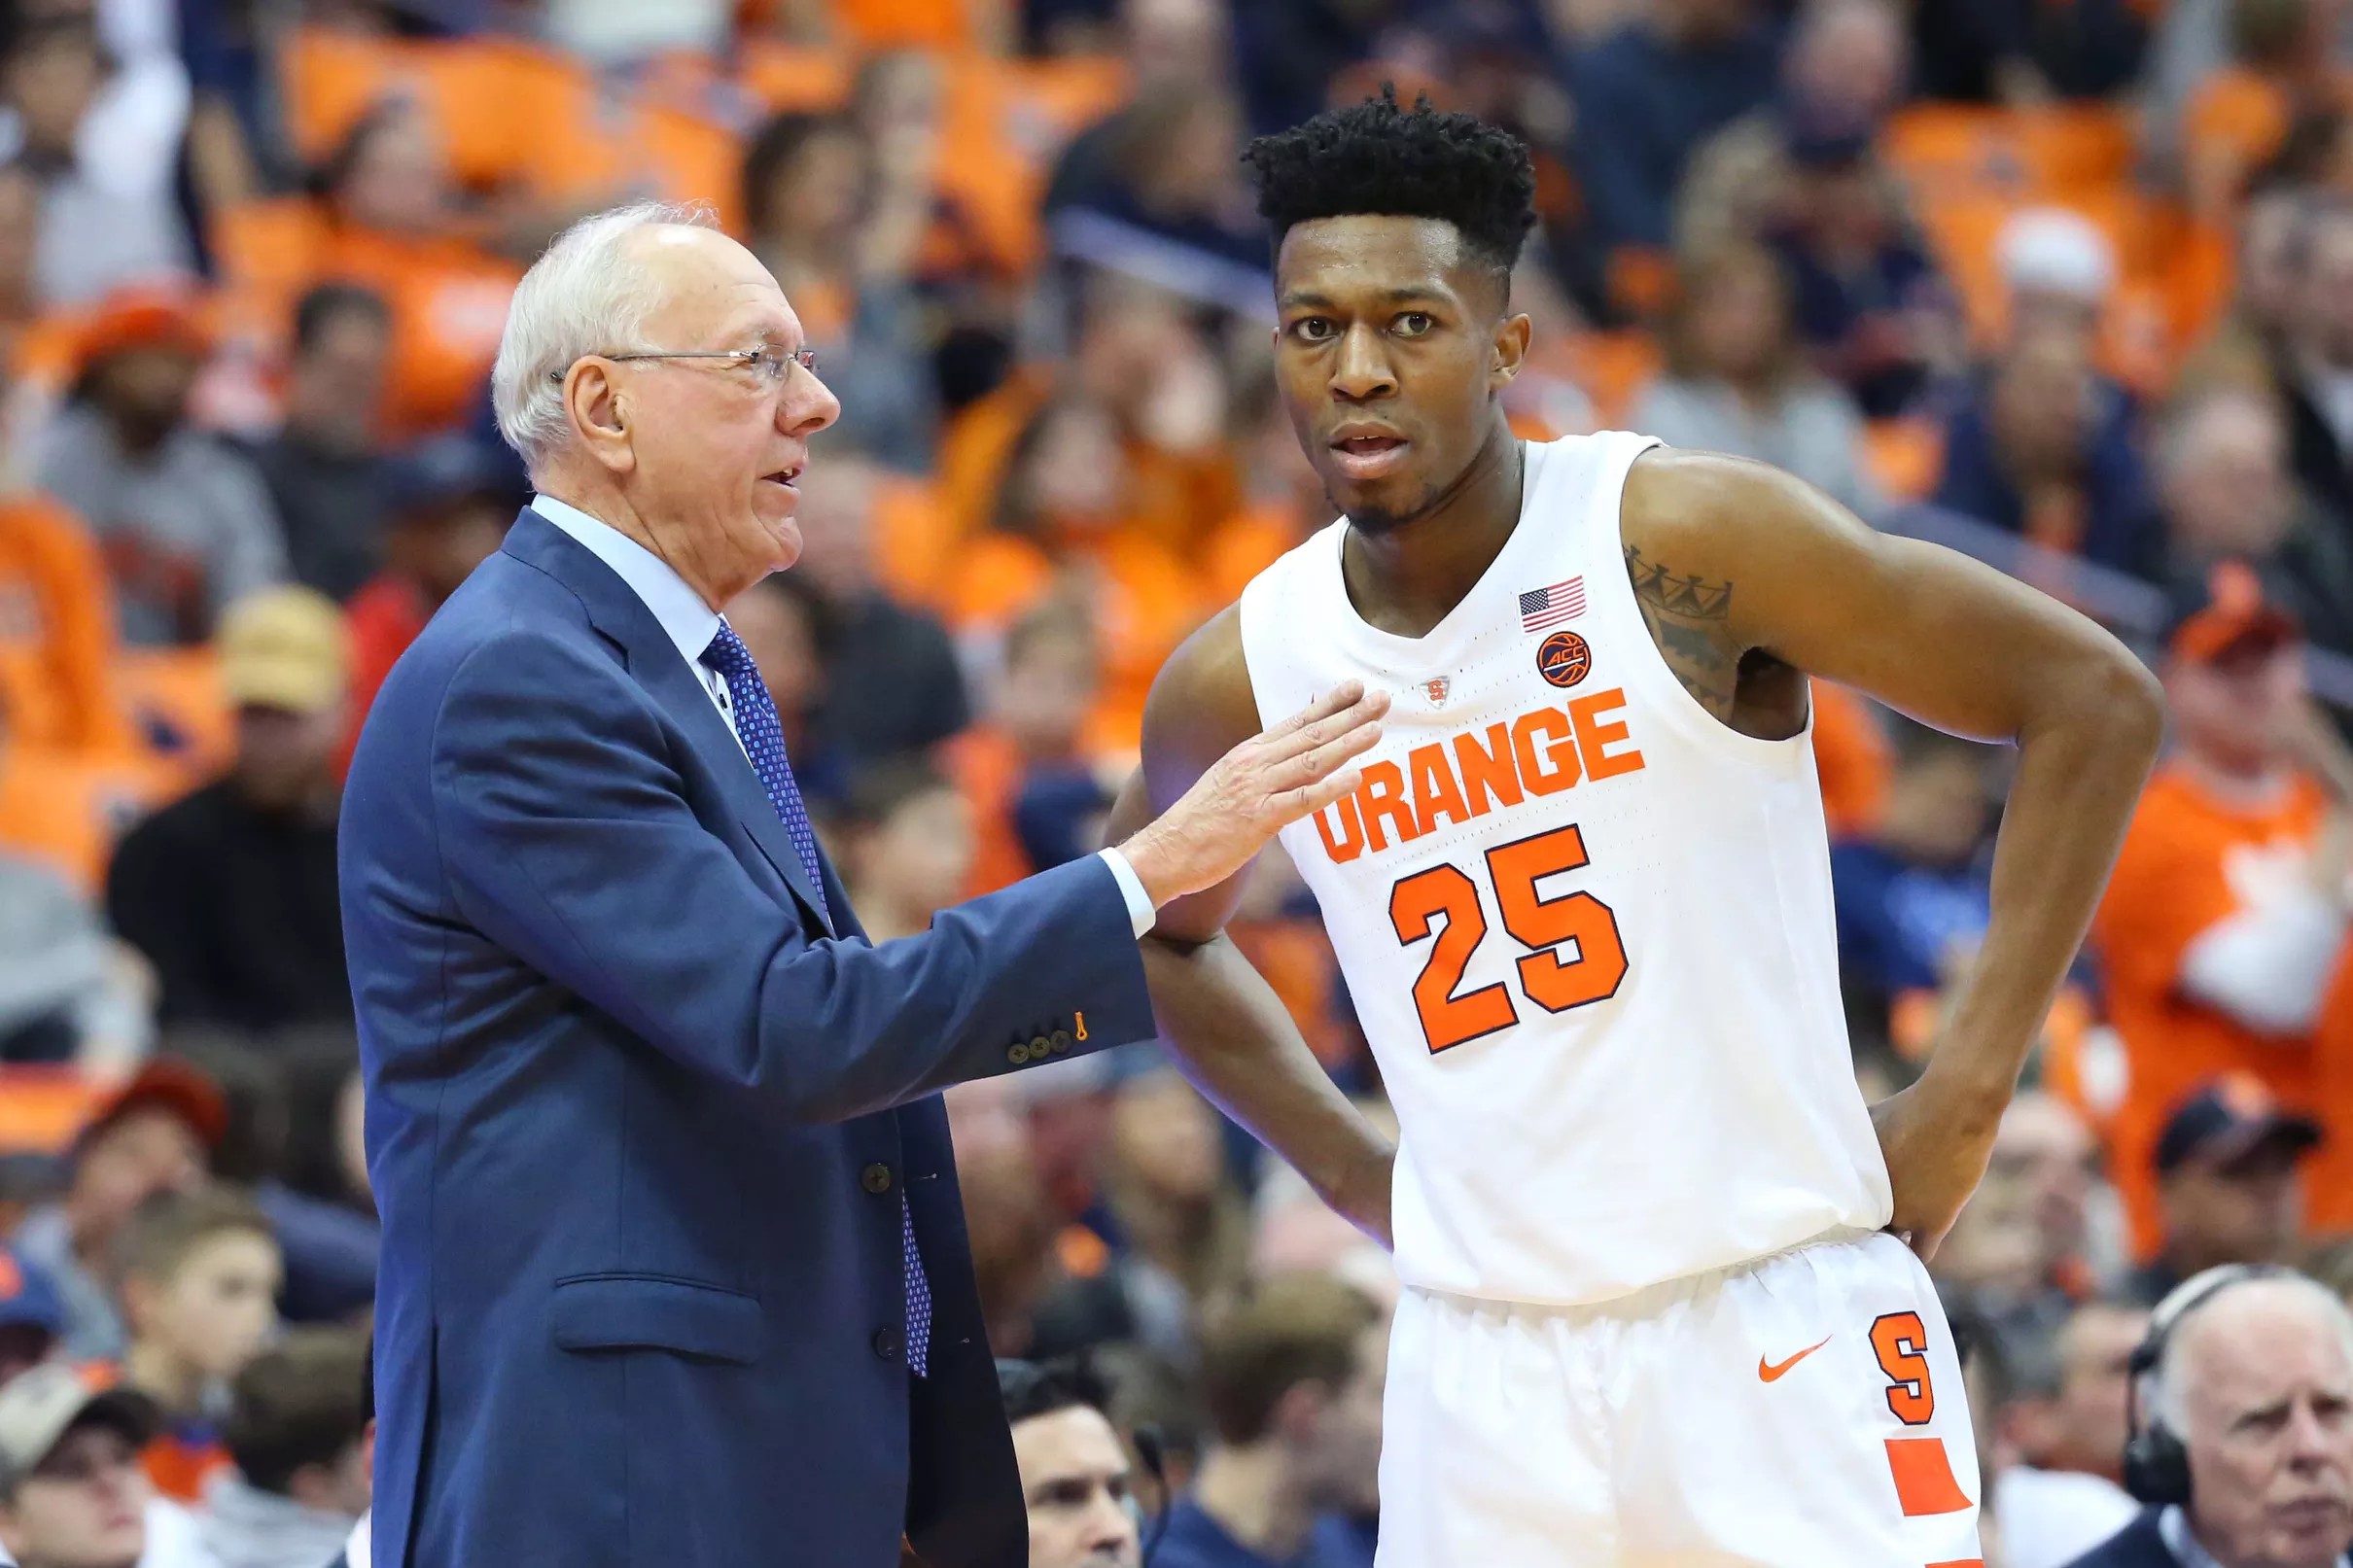 Syracuse men’s basketball ranked 15th in new AP Poll